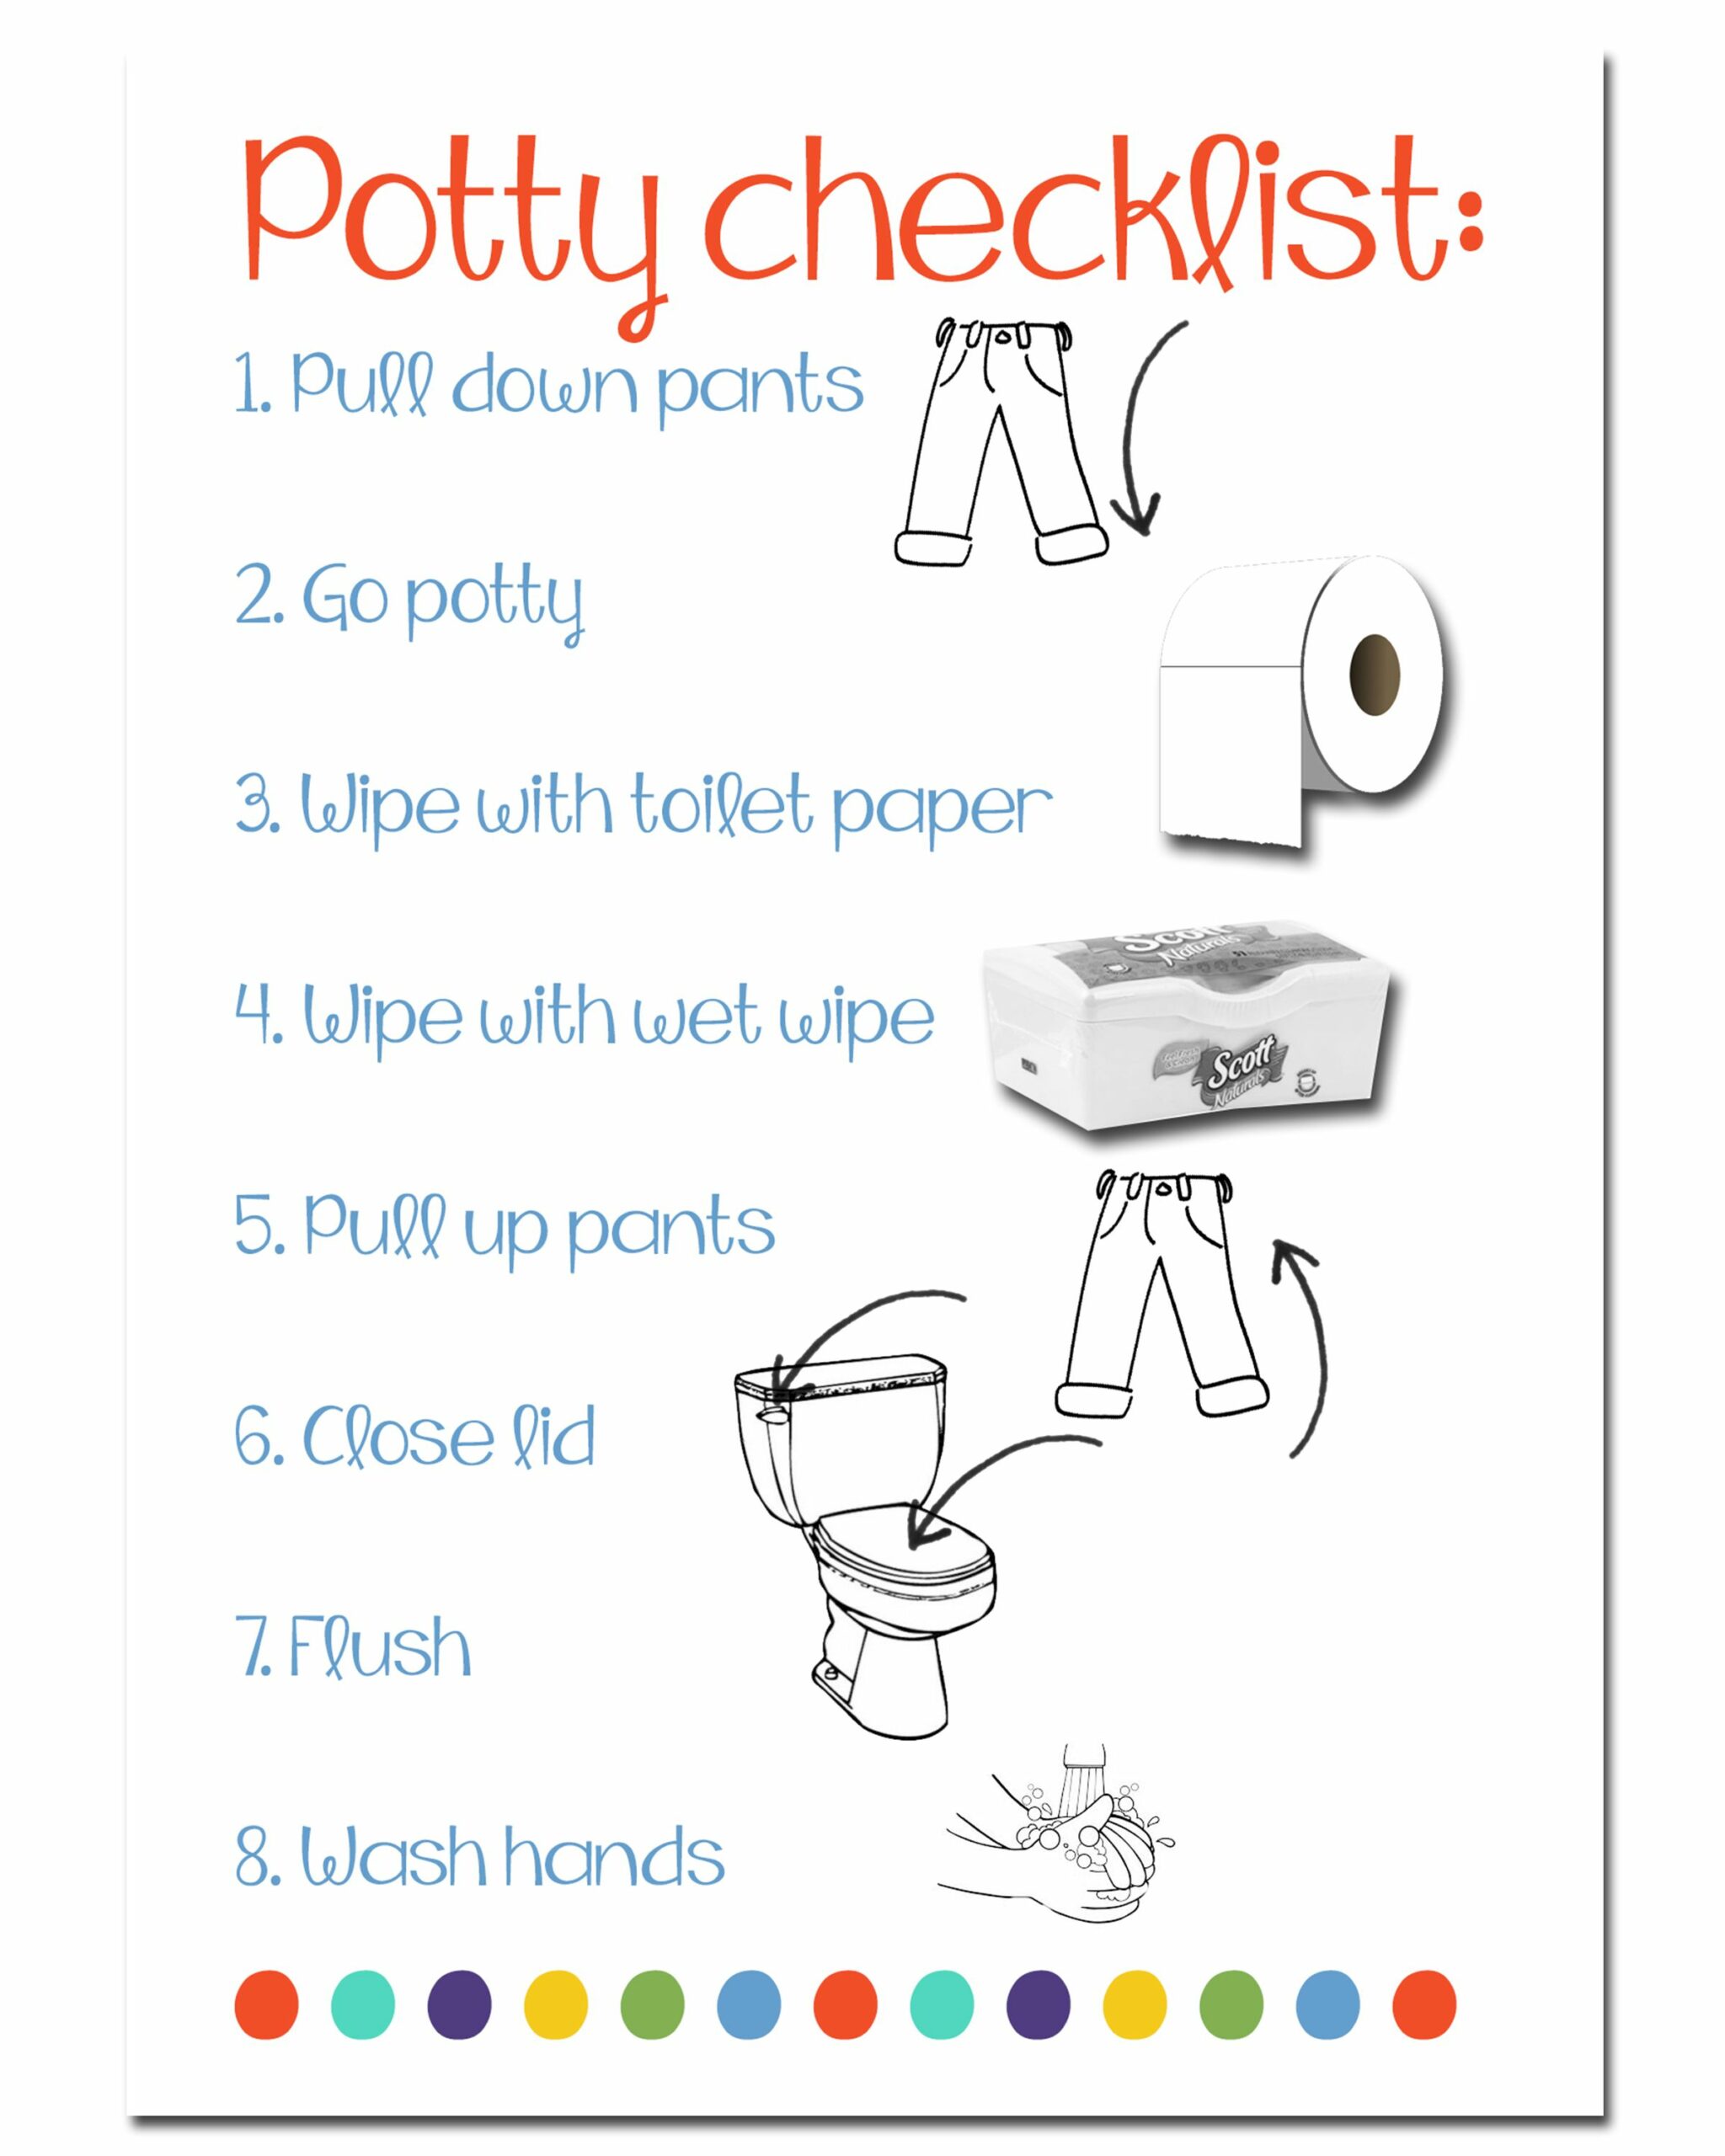 potty training baby hacks Potty training hacks ultimate guide kids activities kidsactivitiesblog toddler printables tools ever tips other advice including people girls toilet articles